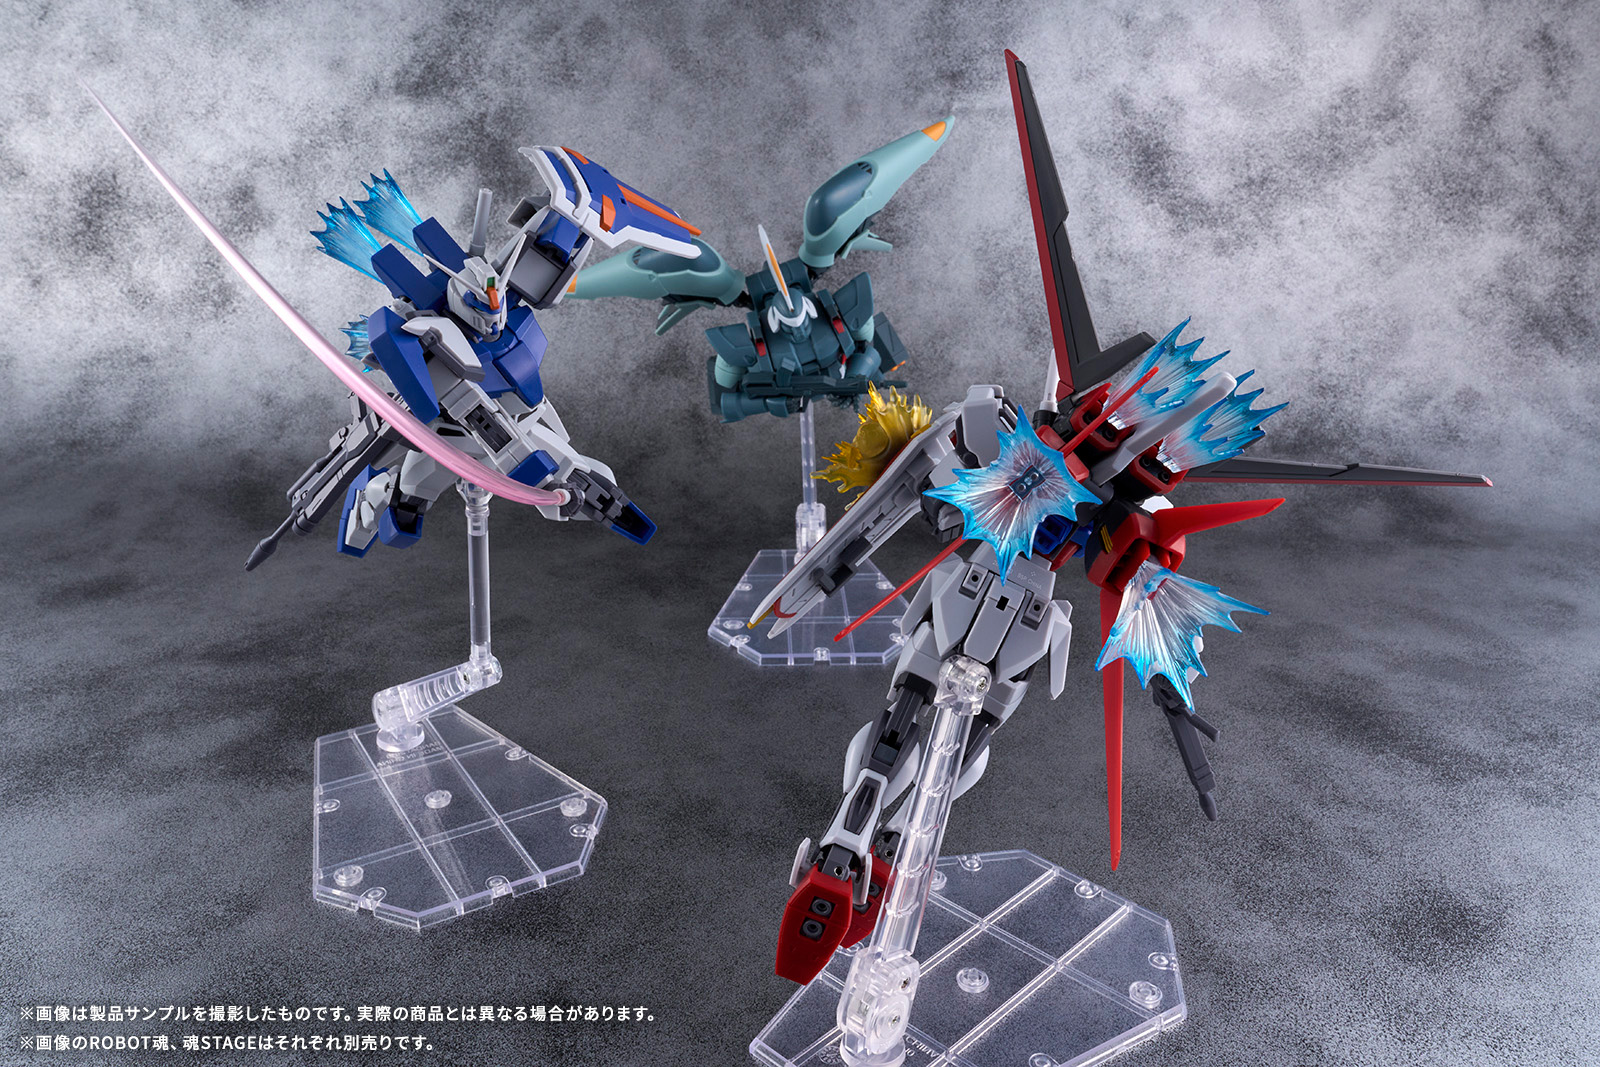 Introducing GAT-X102 DUEL GUNDAM from the ROBOT SPIRITS ver. A.N.I.M.E. series! Released March 25!